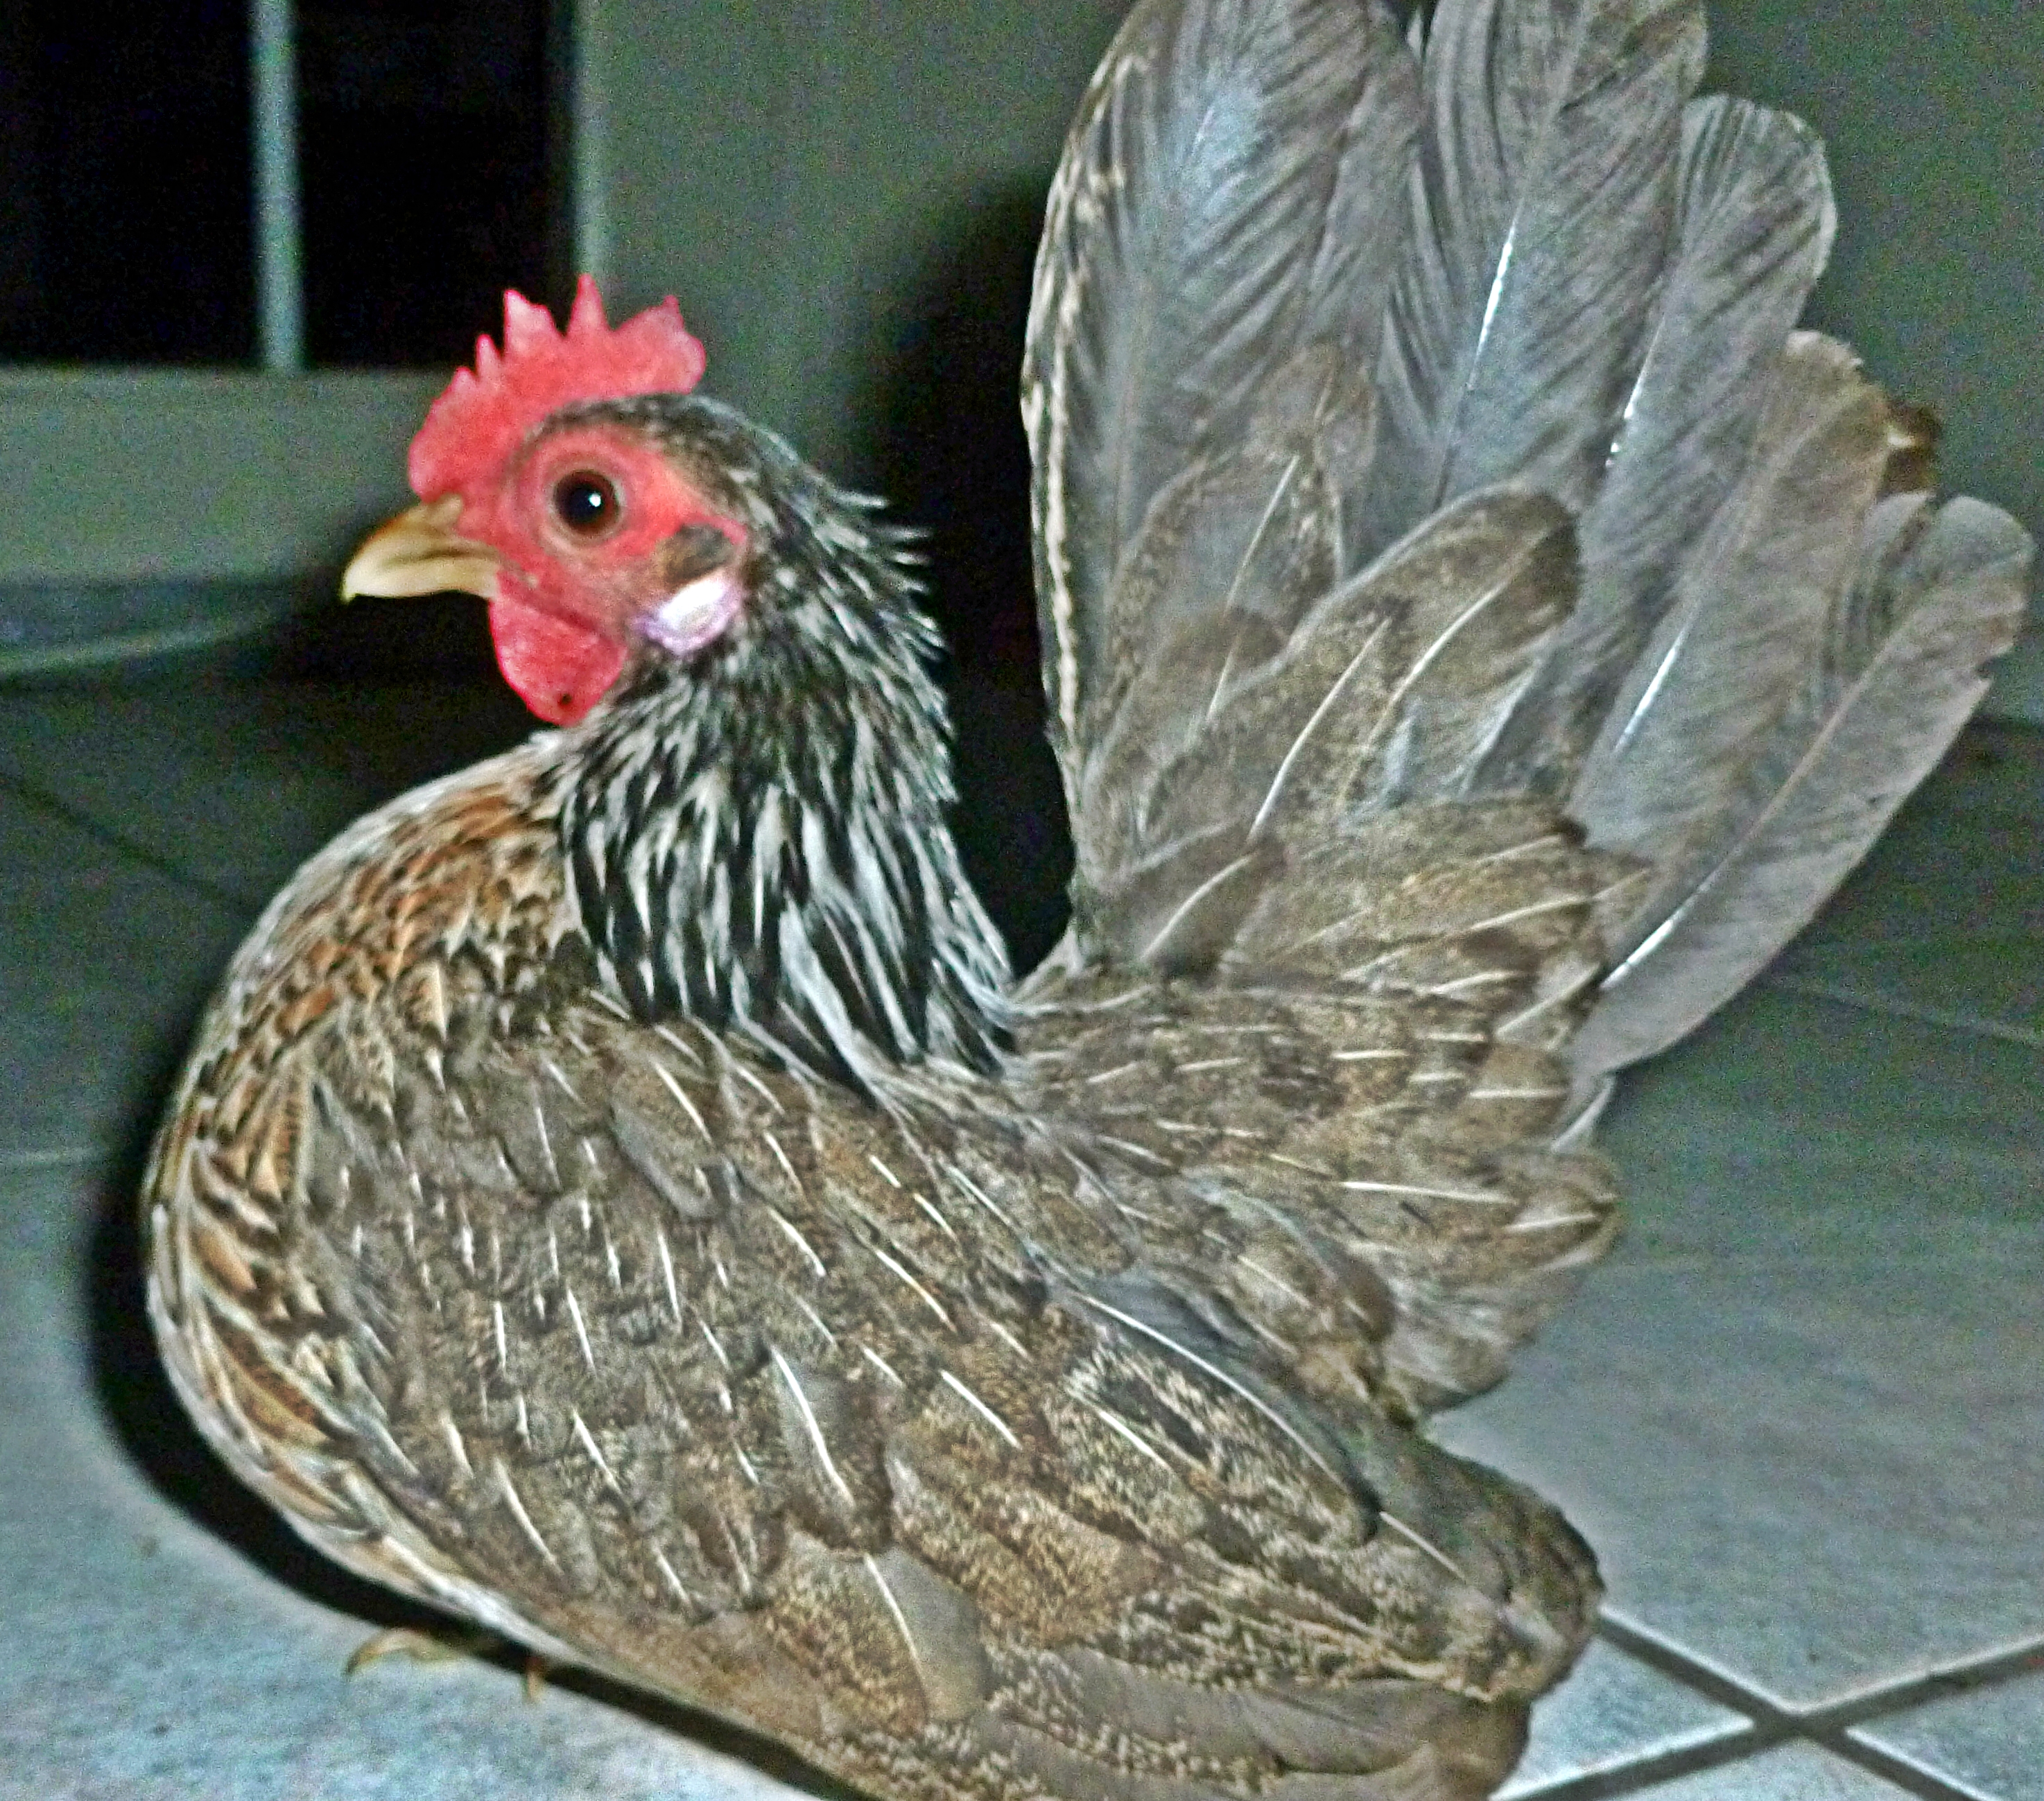 This is a Feb 2013 pullet, she made it into the breeding coop, she is in the seven ounce range. She is being bred back to her father LJ a Micro cock in the 9 ounce range

Because she is a 2013 chick, and a breeder coop bird her photo makes it in the 2013 Breeder Album and the 2013 Chick Album